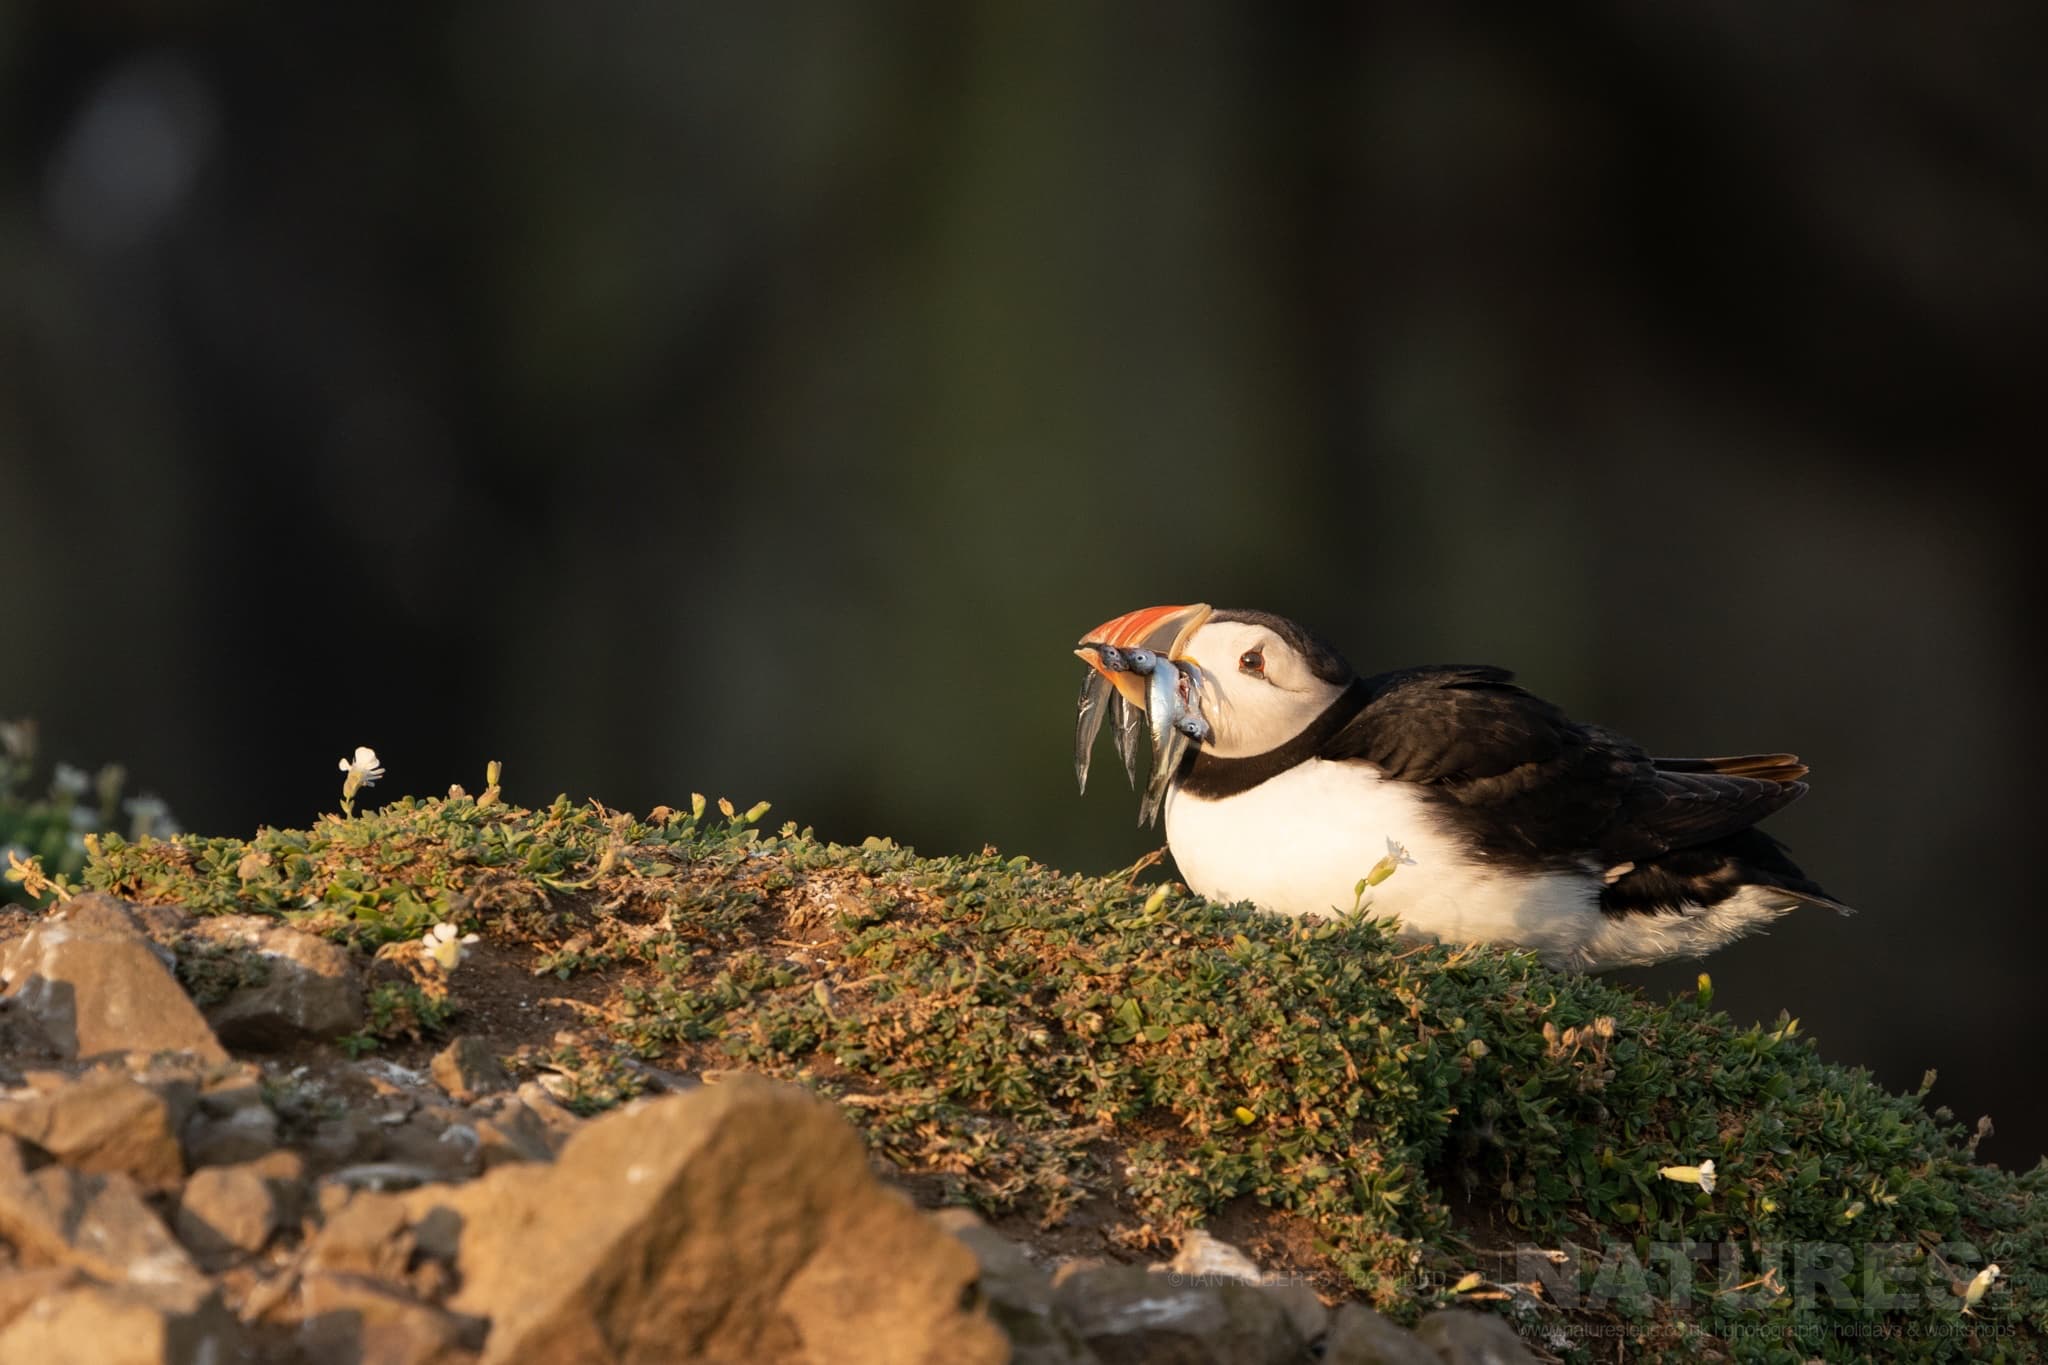 One Of The Puffins Rests With A Beak Full Of Sand Eels This Image Was Captured By Ian Roberts During The Natureslens Welsh Puffins Of Skomer Island Photography Holiday